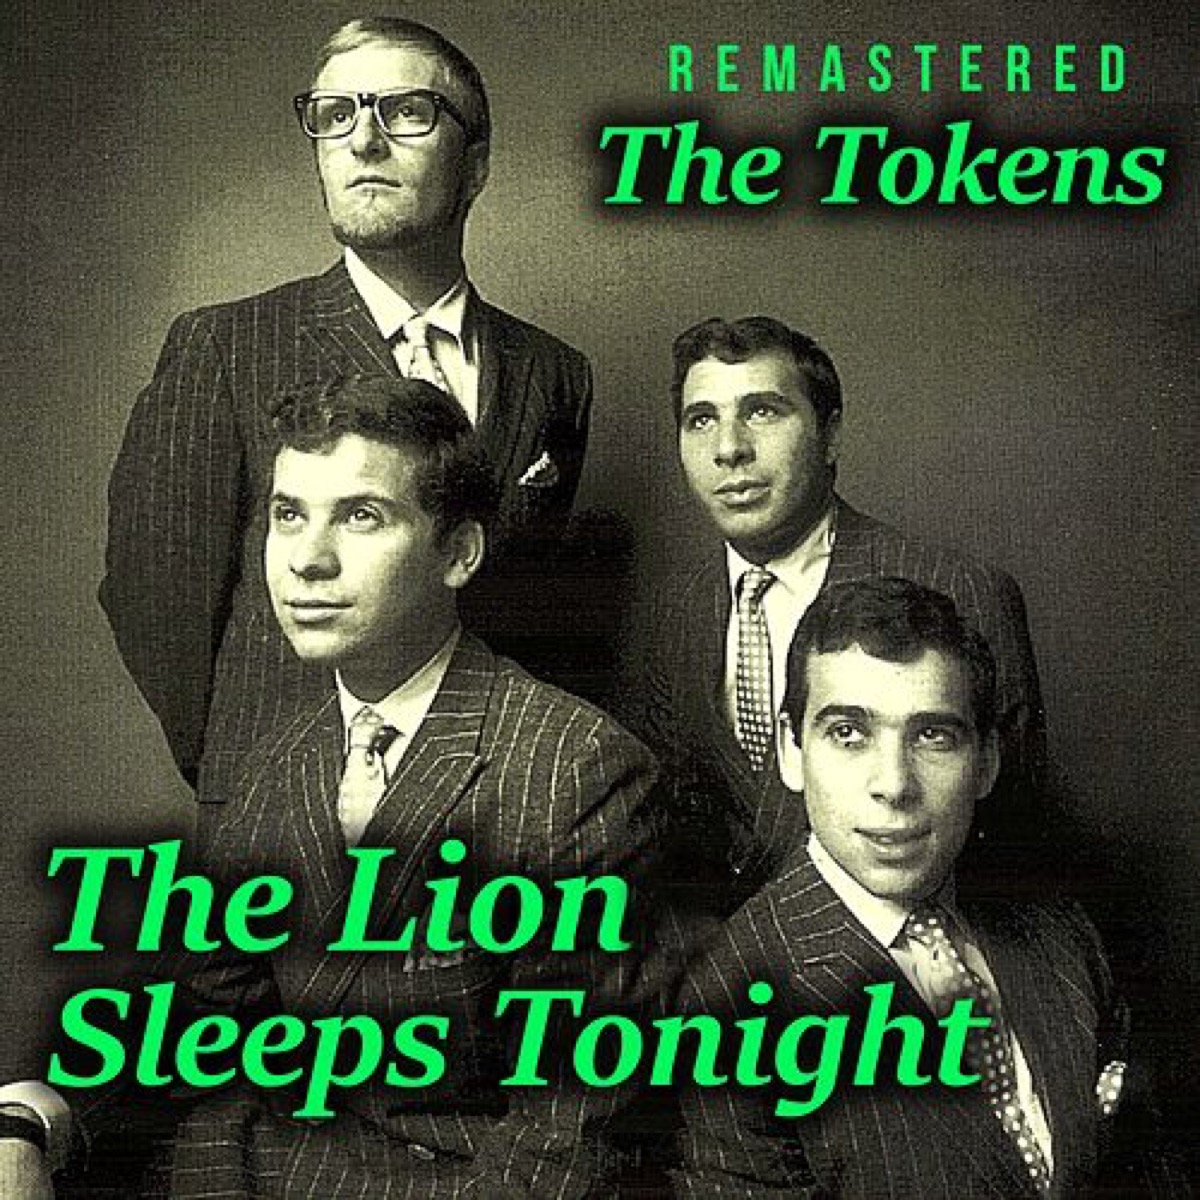 The Lion Sleeps Tonight by The Tokens